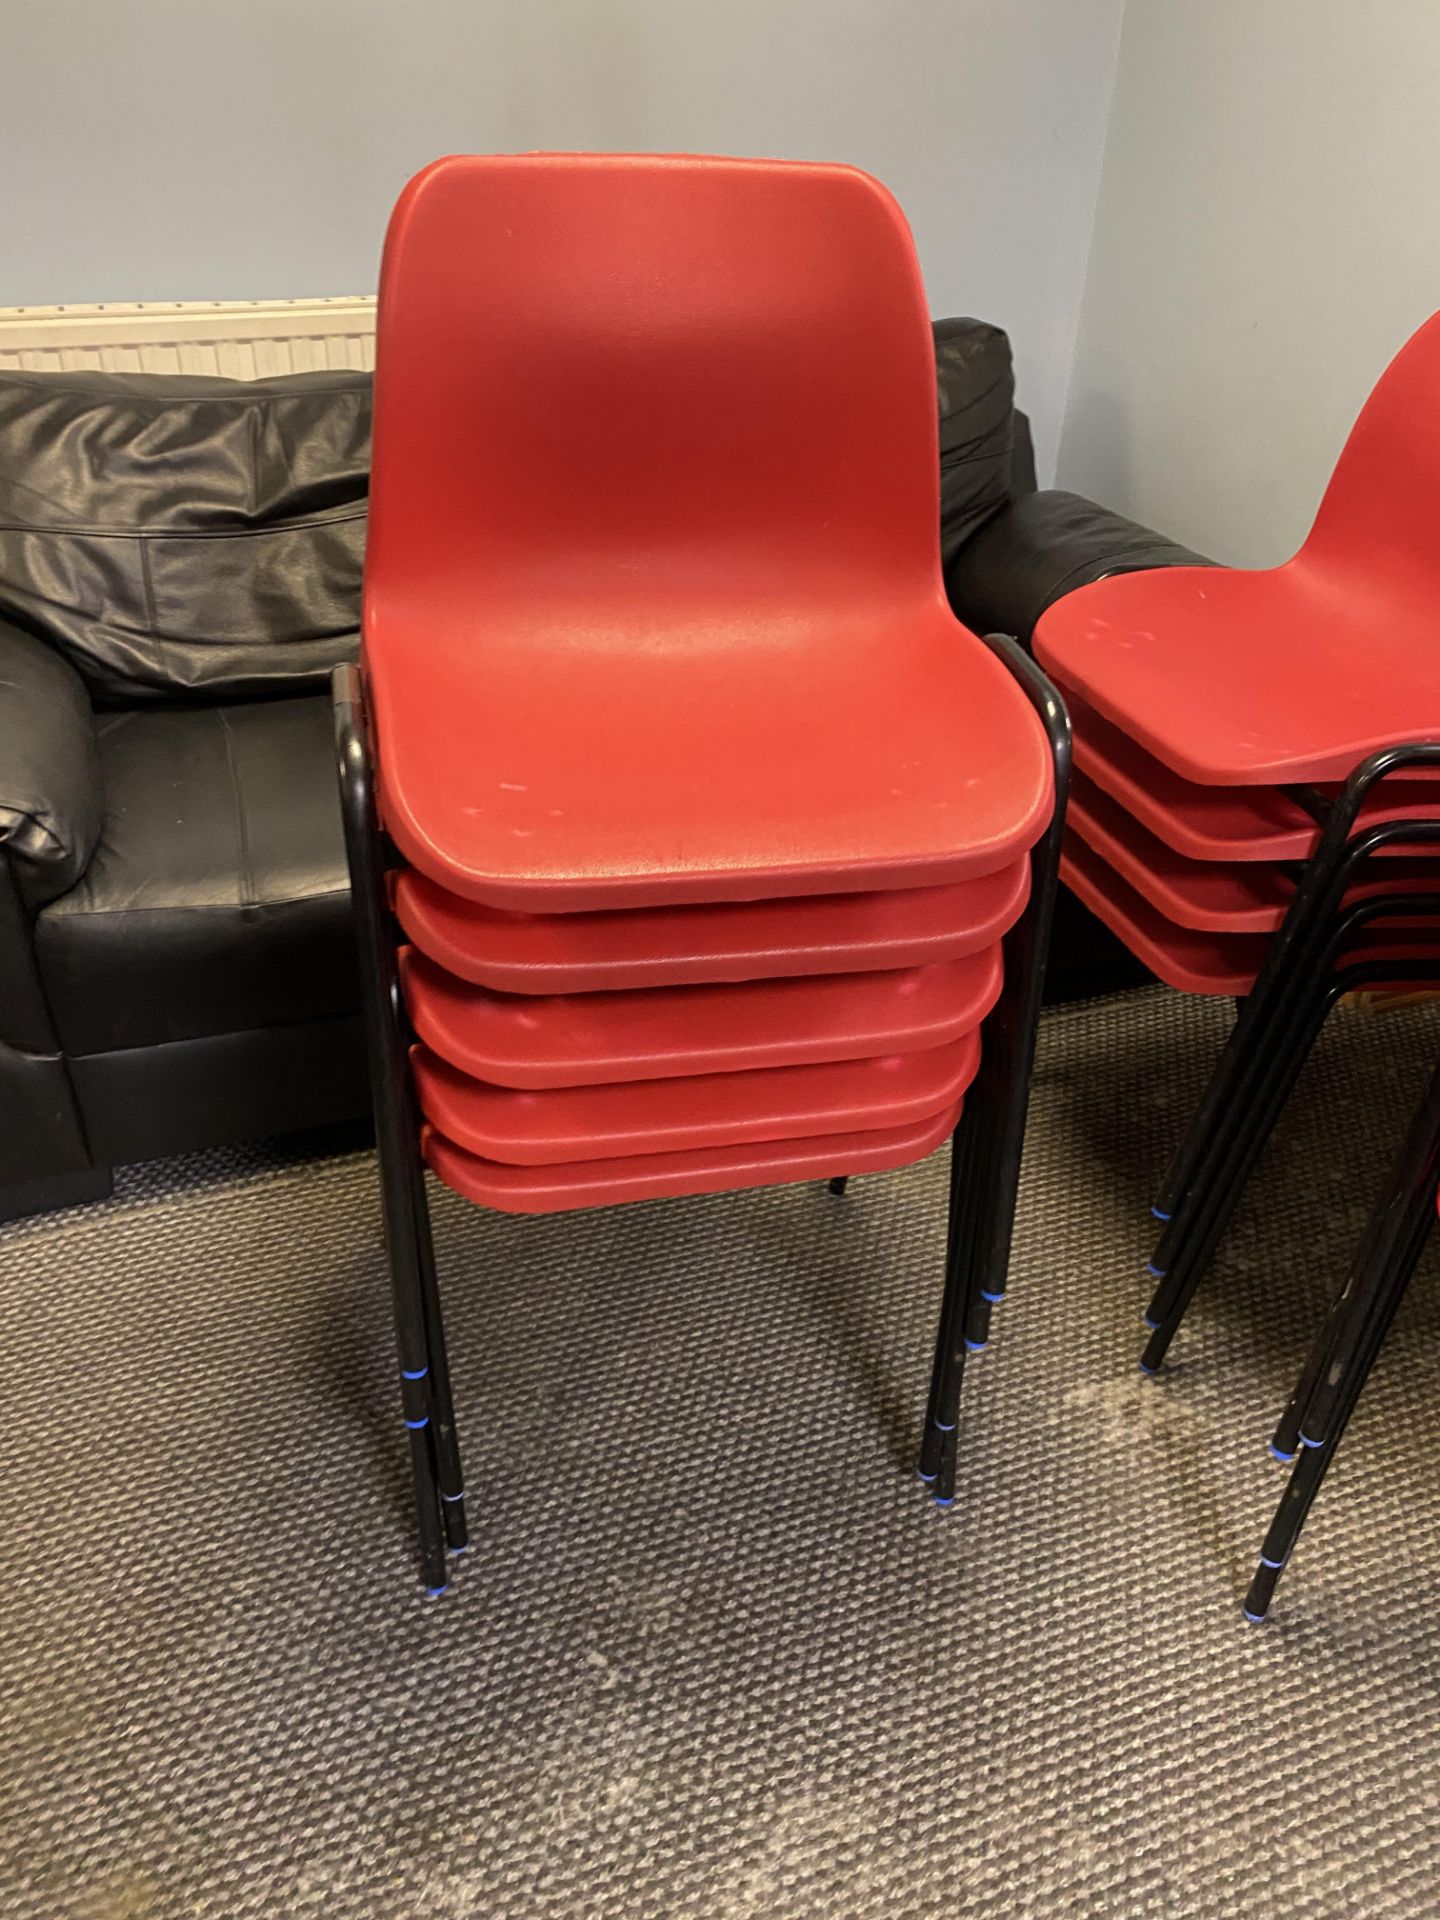 13x Red Plastic Chairs - Image 4 of 5